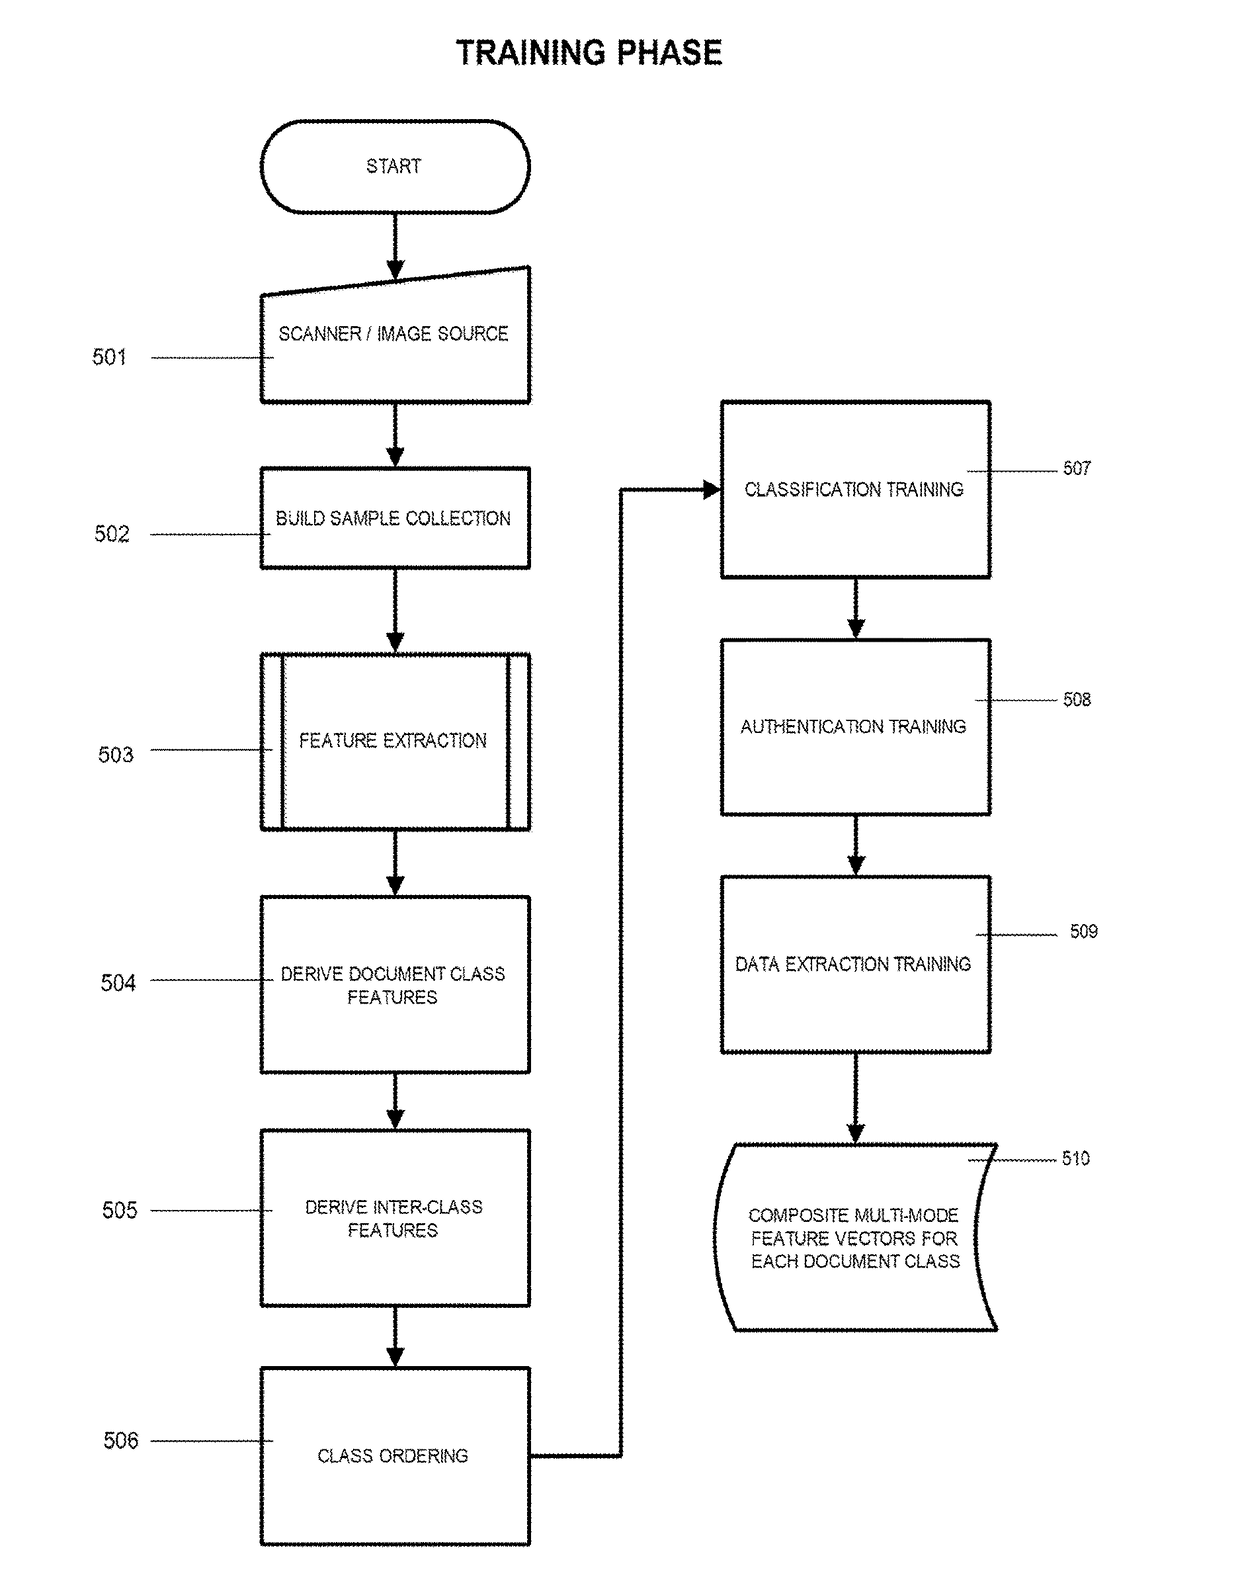 A self-learning system and methods for automatic document recognition, authentication, and information extraction